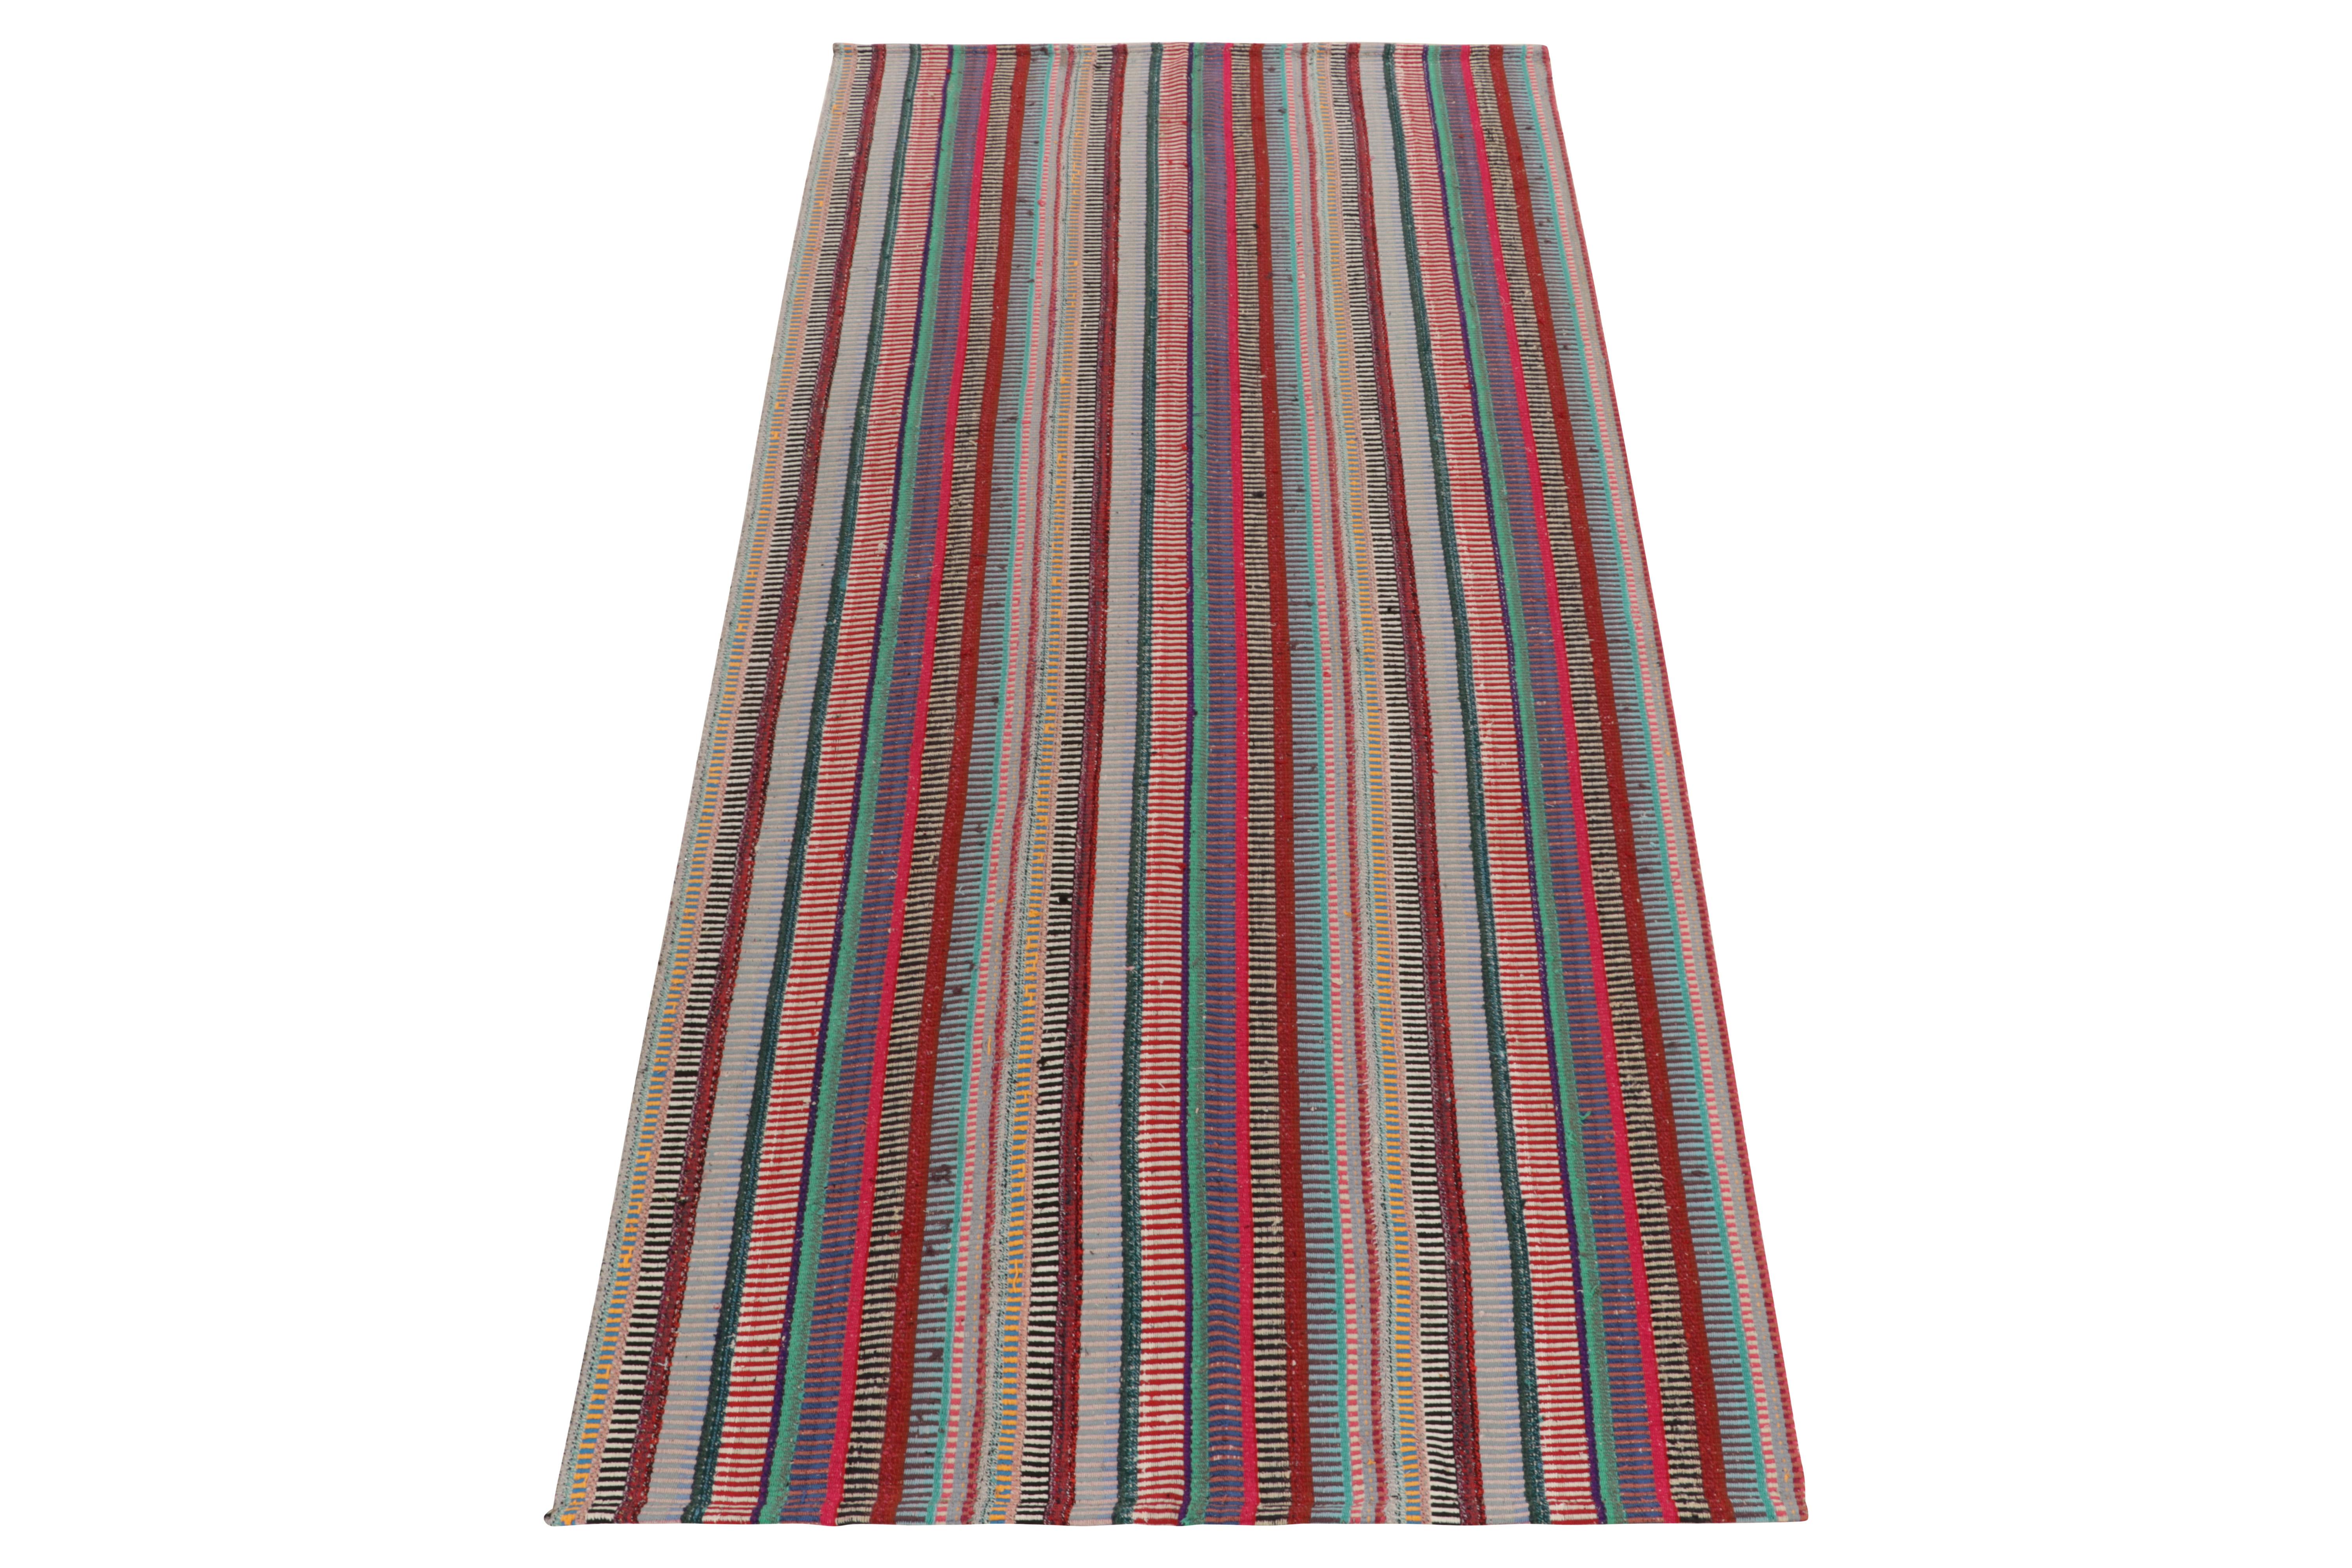 Originating from Turkey circa 1950-1960, a rare type of kilim rug style now entering our vintage flat weave selections. 

Characterized by fine detailing with the colors within the polychromatic stripes, the playful piece welcomes a departure from